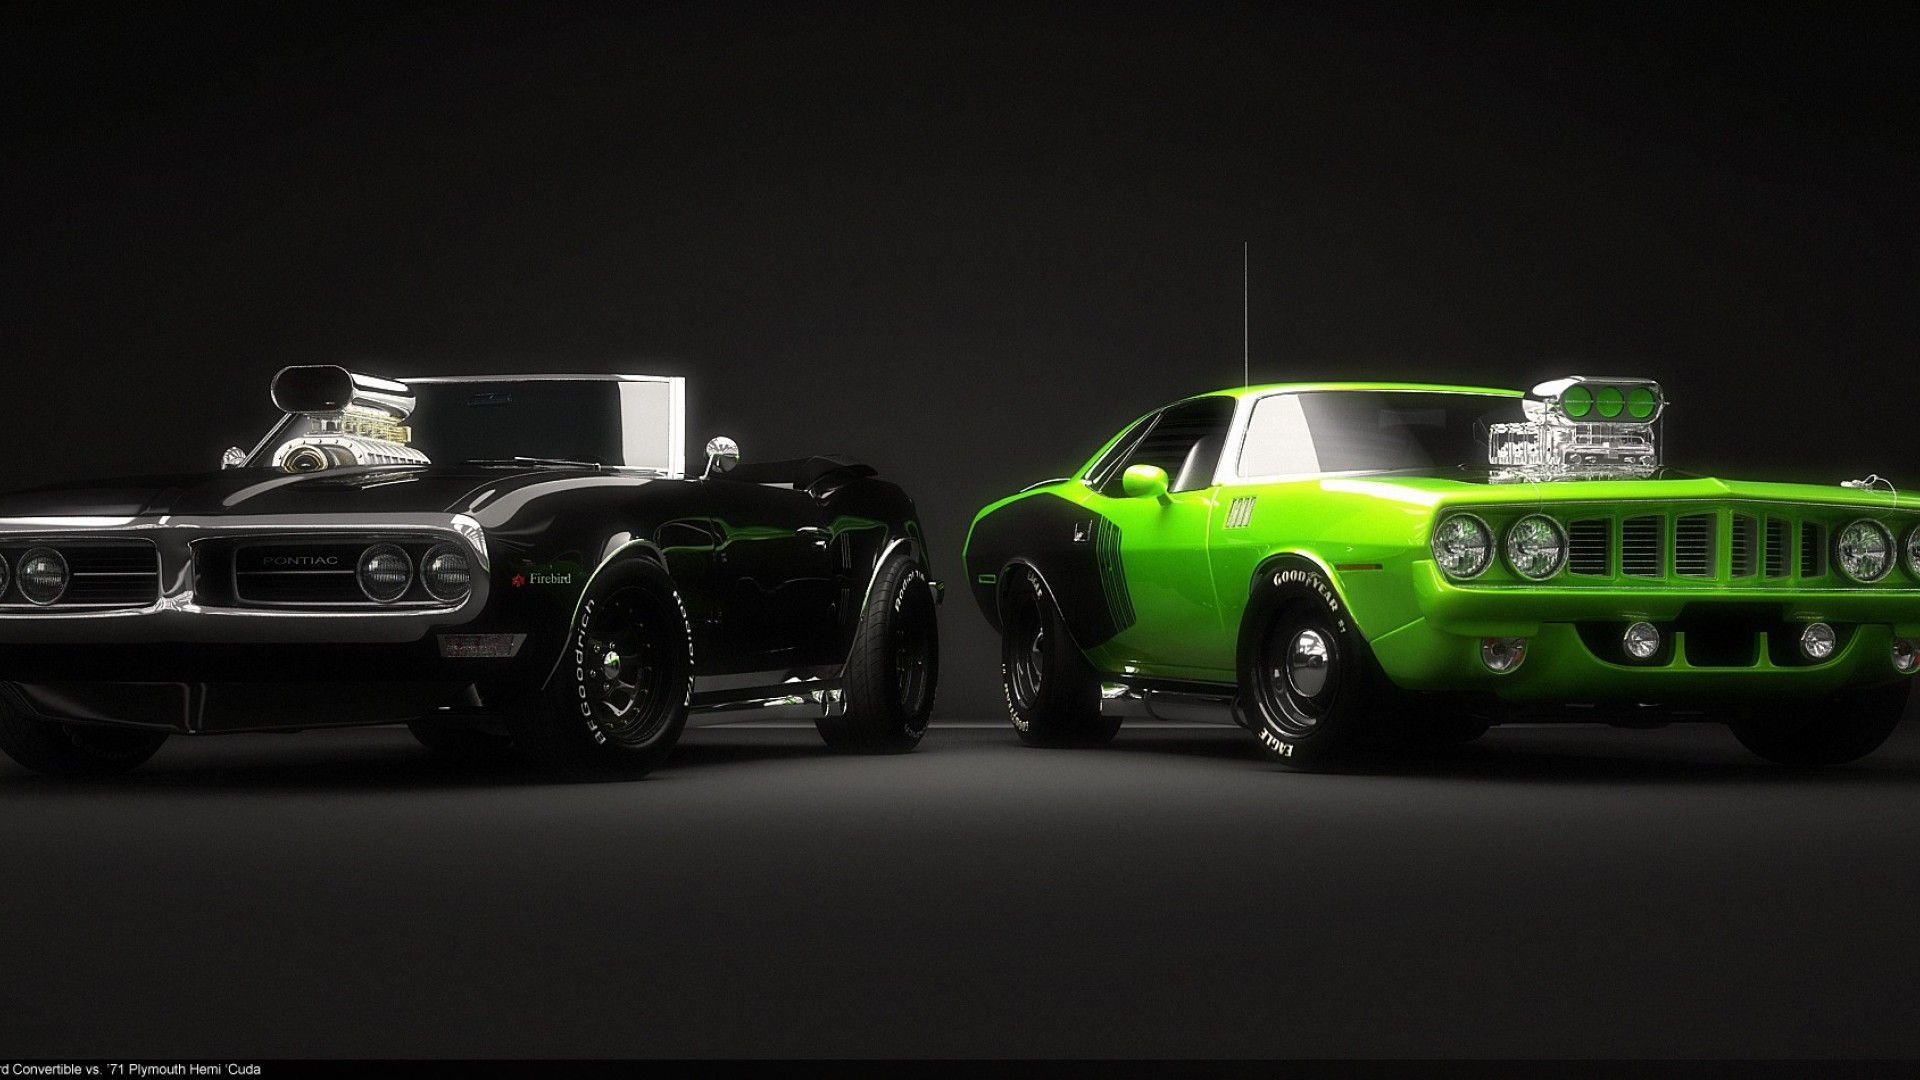 1920x1080 Download Black And Green Car Wallpapers HD 3D #8929 (377) Full .